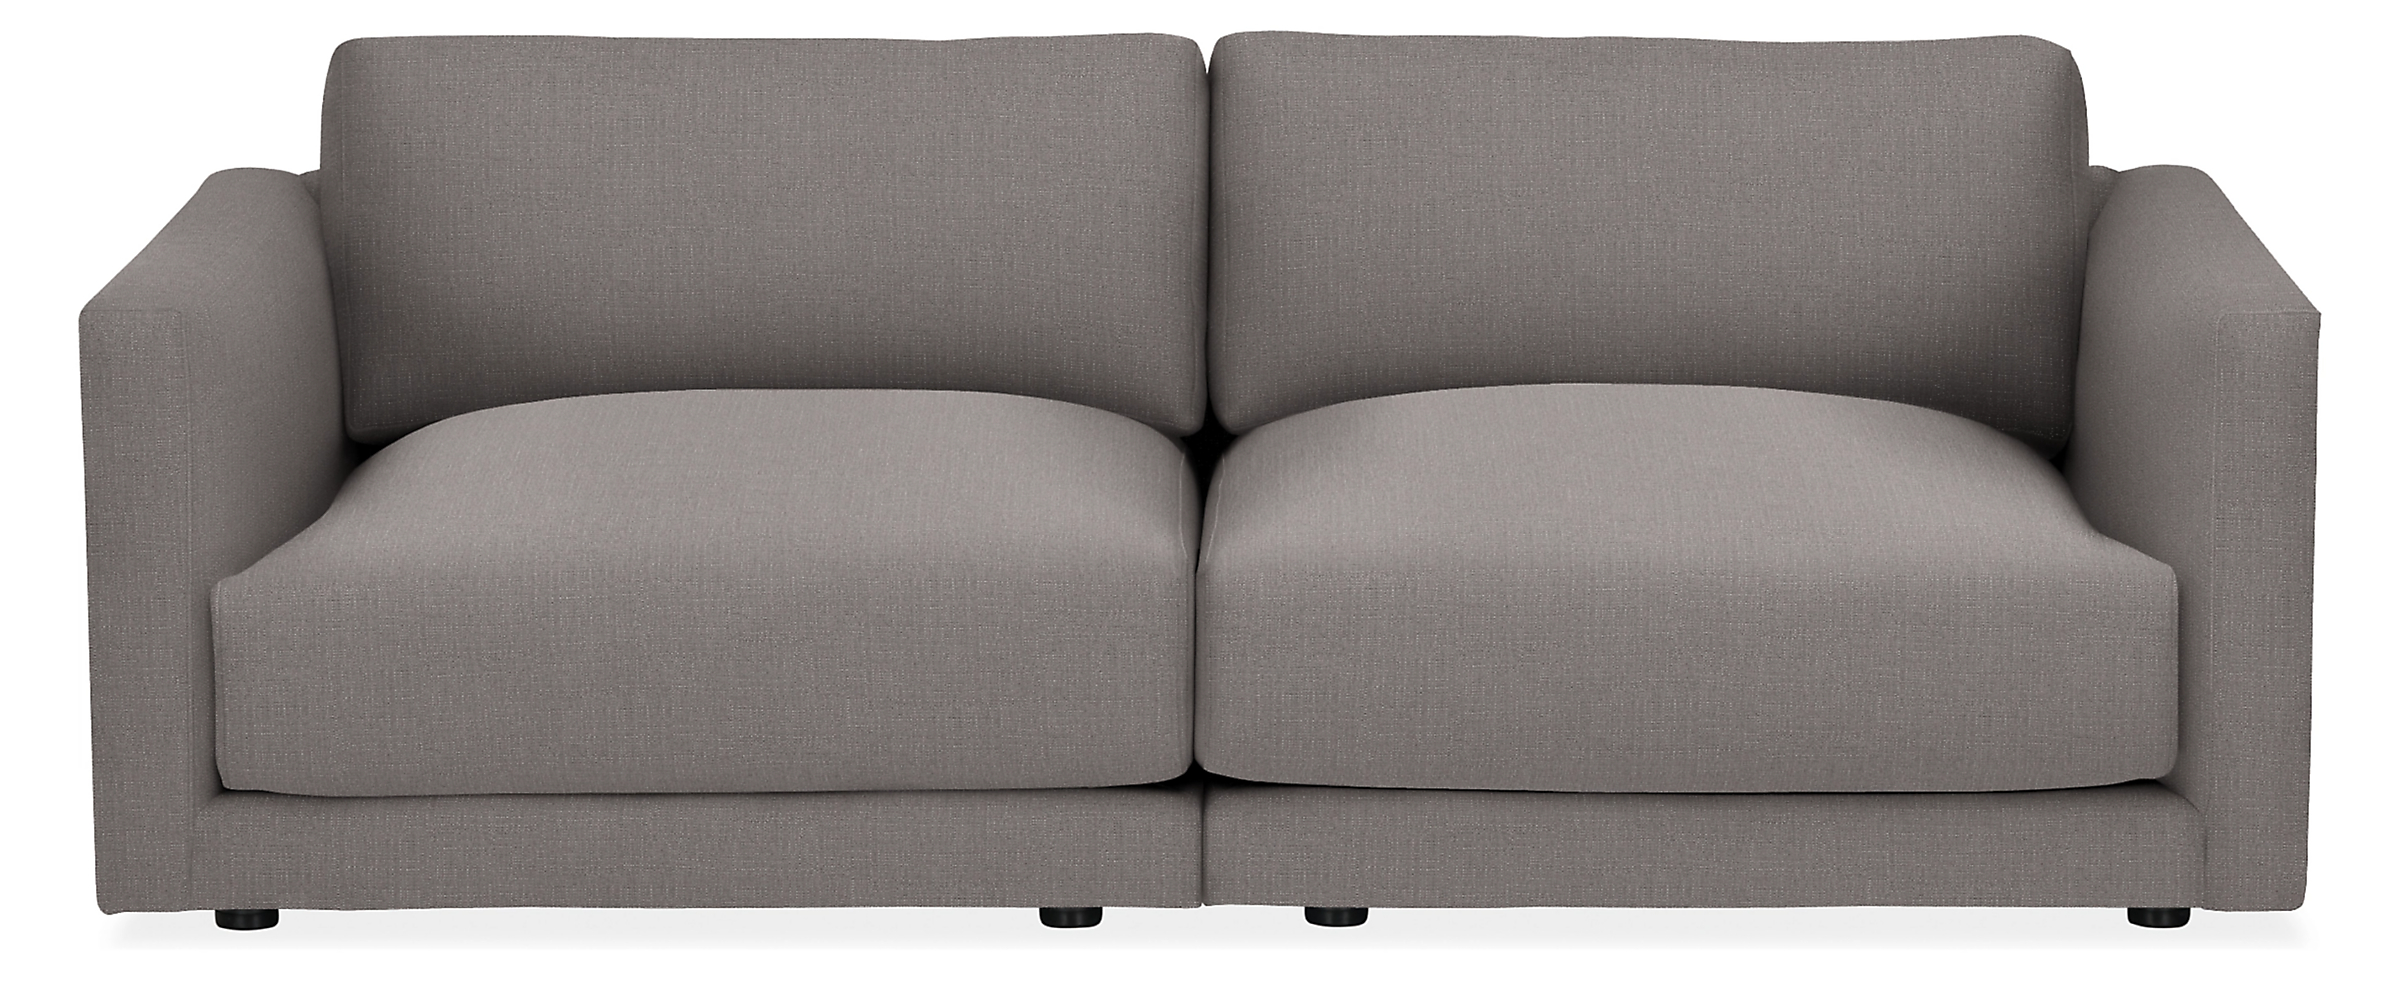 Clemens 74" Two-Piece Modular Sofa in Hines Graphite